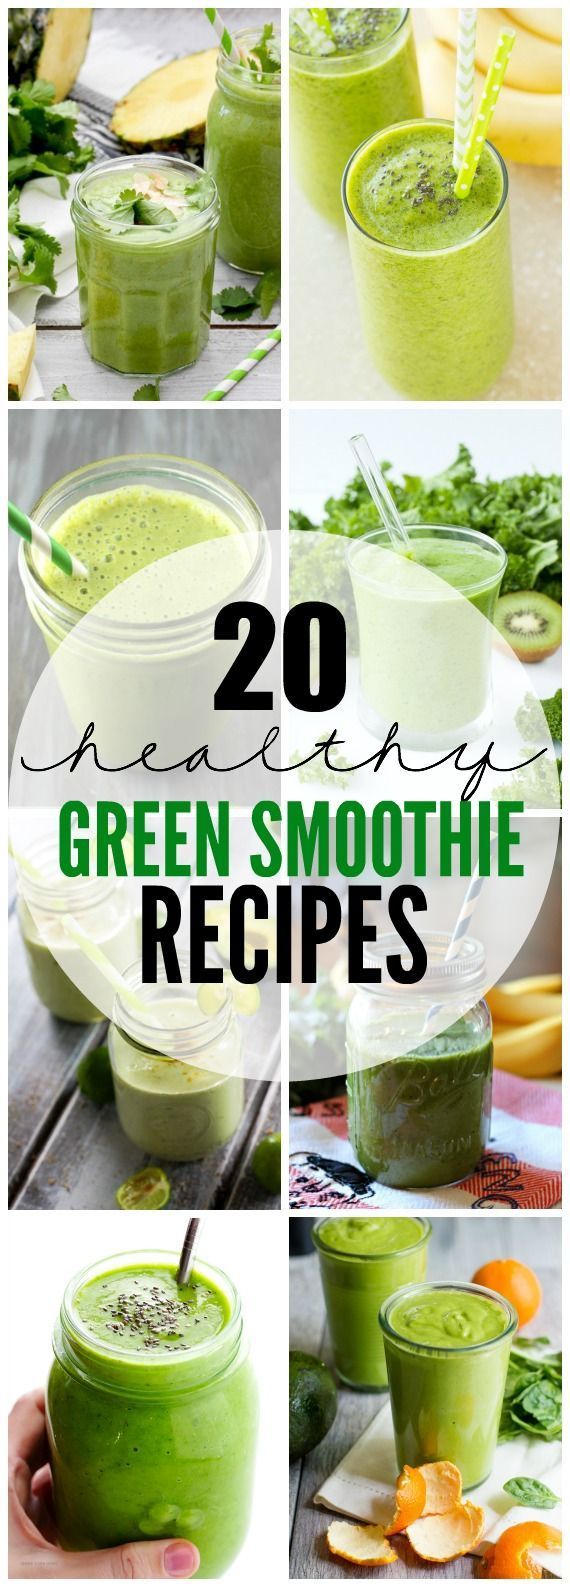 Green smoothies are a quick and simple way to get your veggies in and jumpstart your day with natural energy! Here are 20 Healthy Green Smoothie Recipes to give your body the nutrition it needs to tackle the day. -   23 veggie smoothie recipes
 ideas